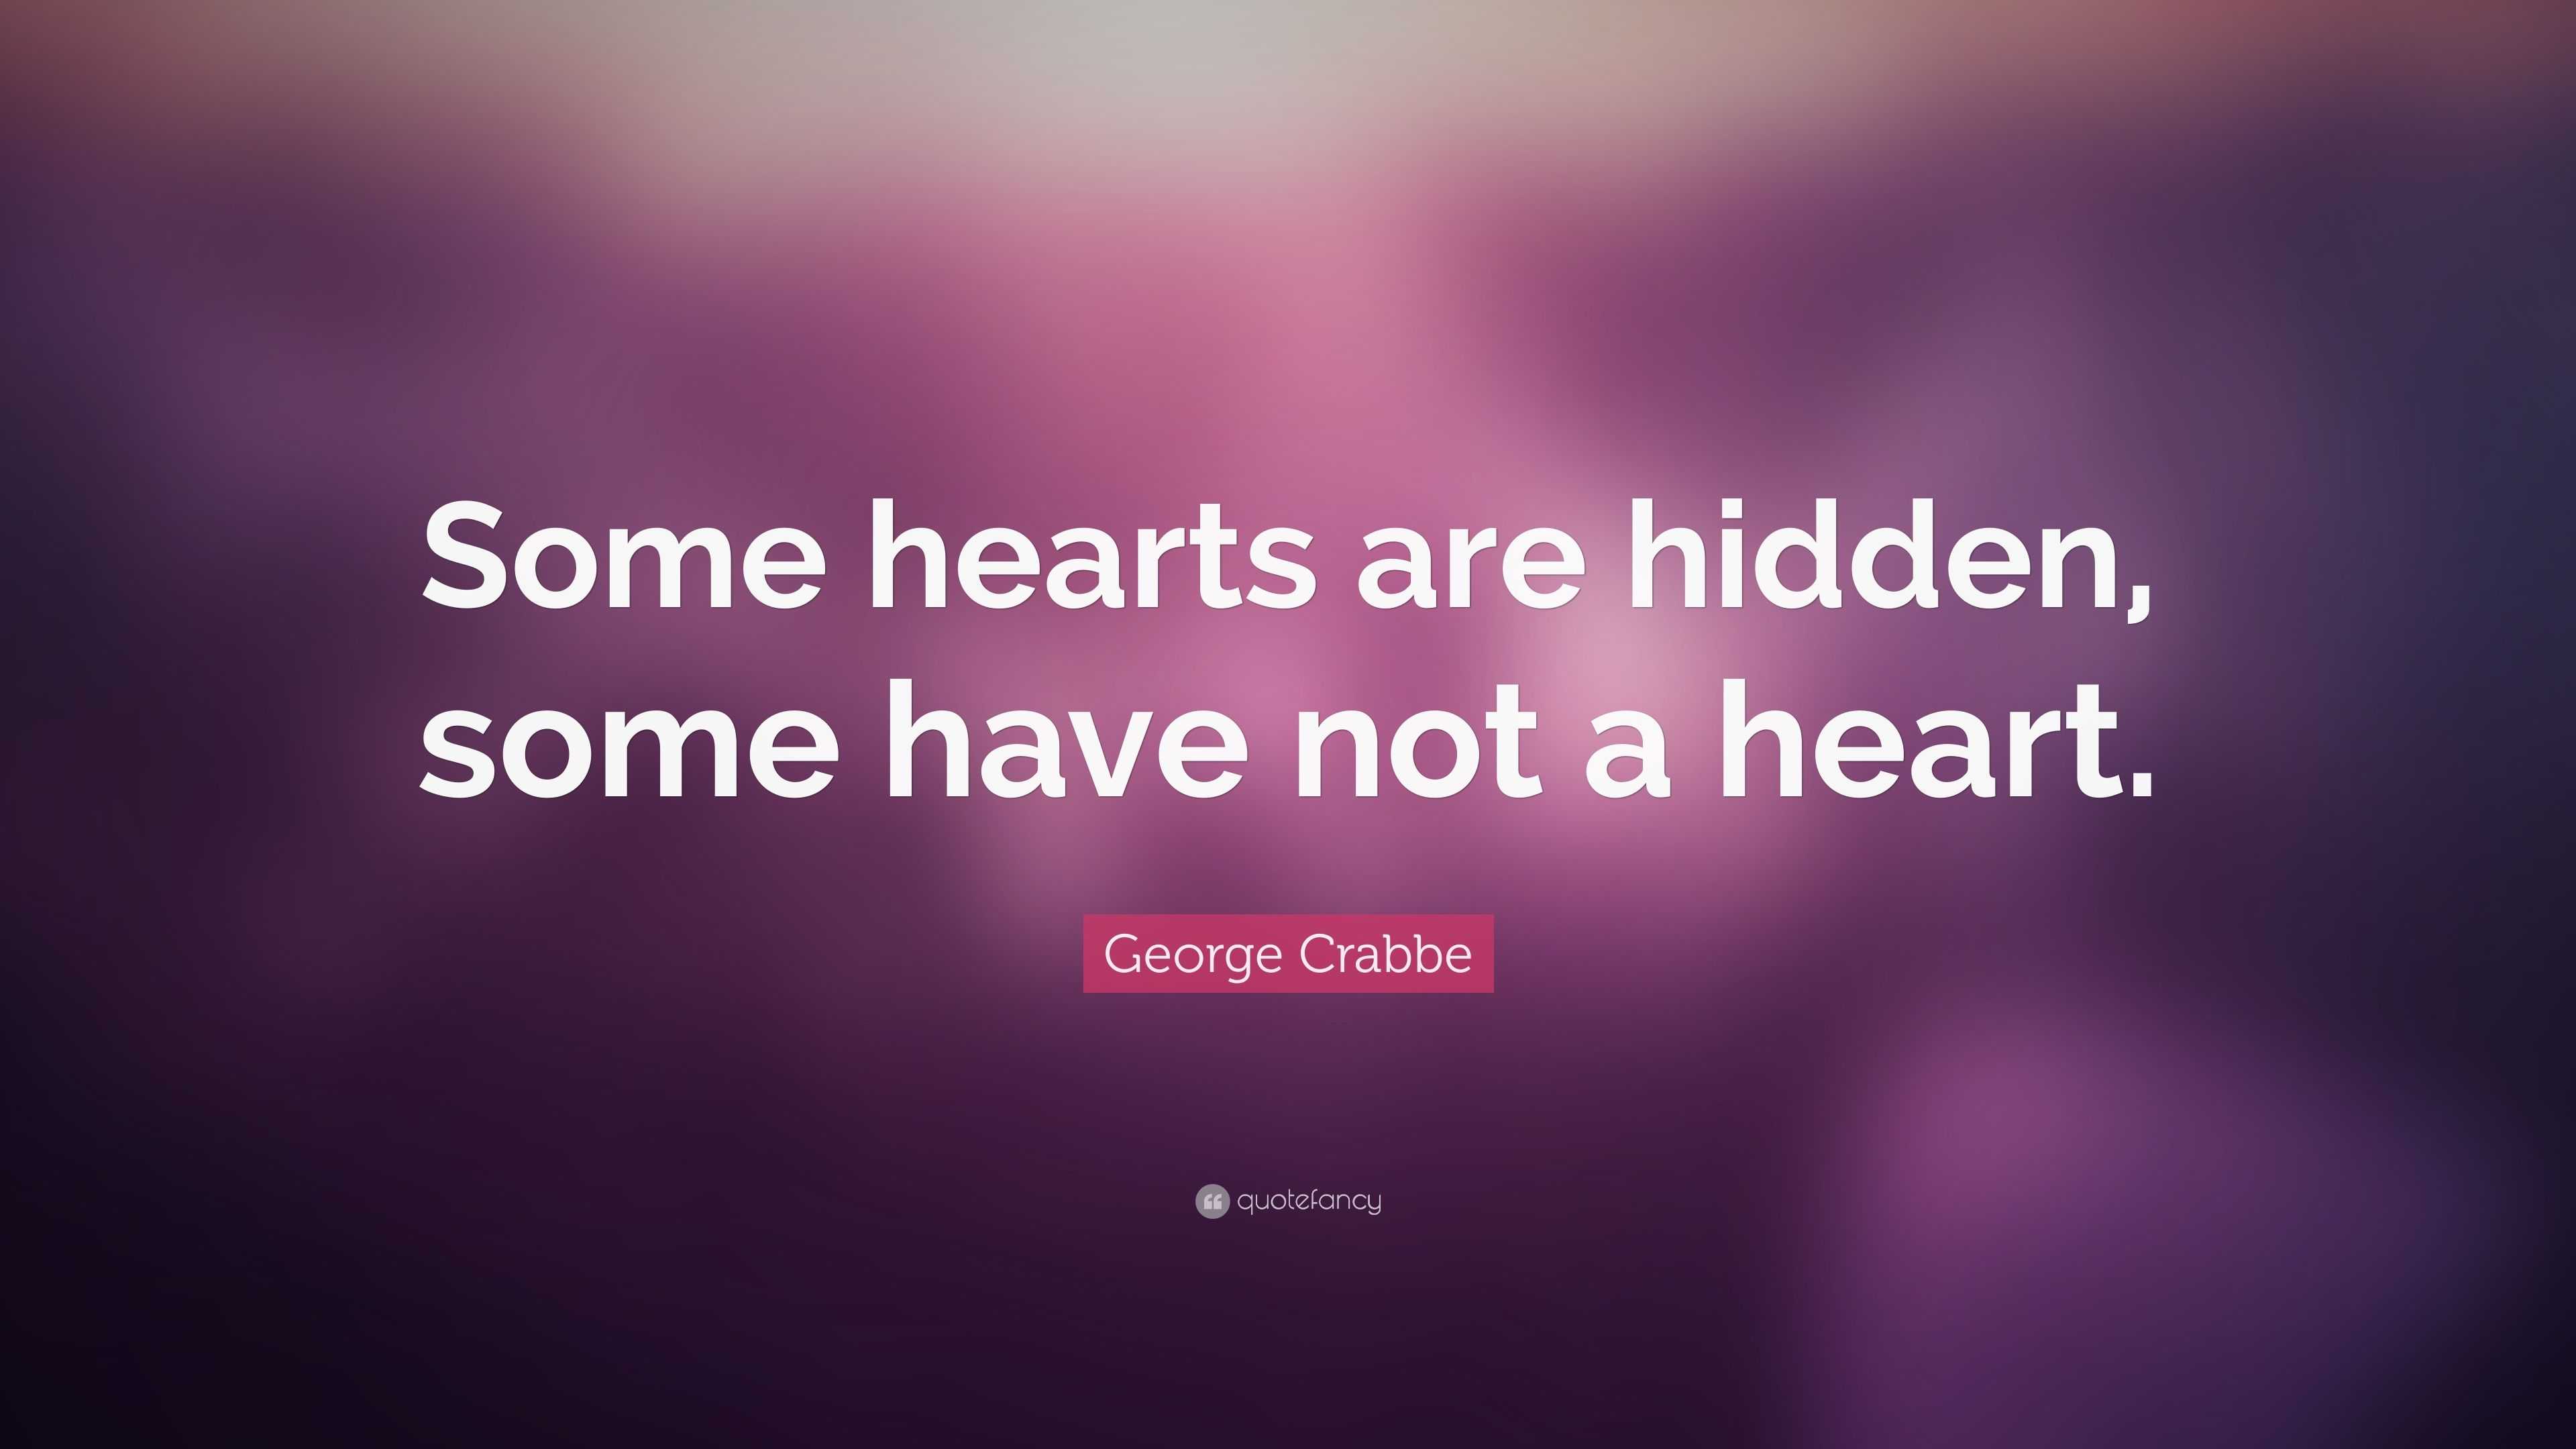 George Crabbe Quote: “Some hearts are hidden, some have not a heart.”